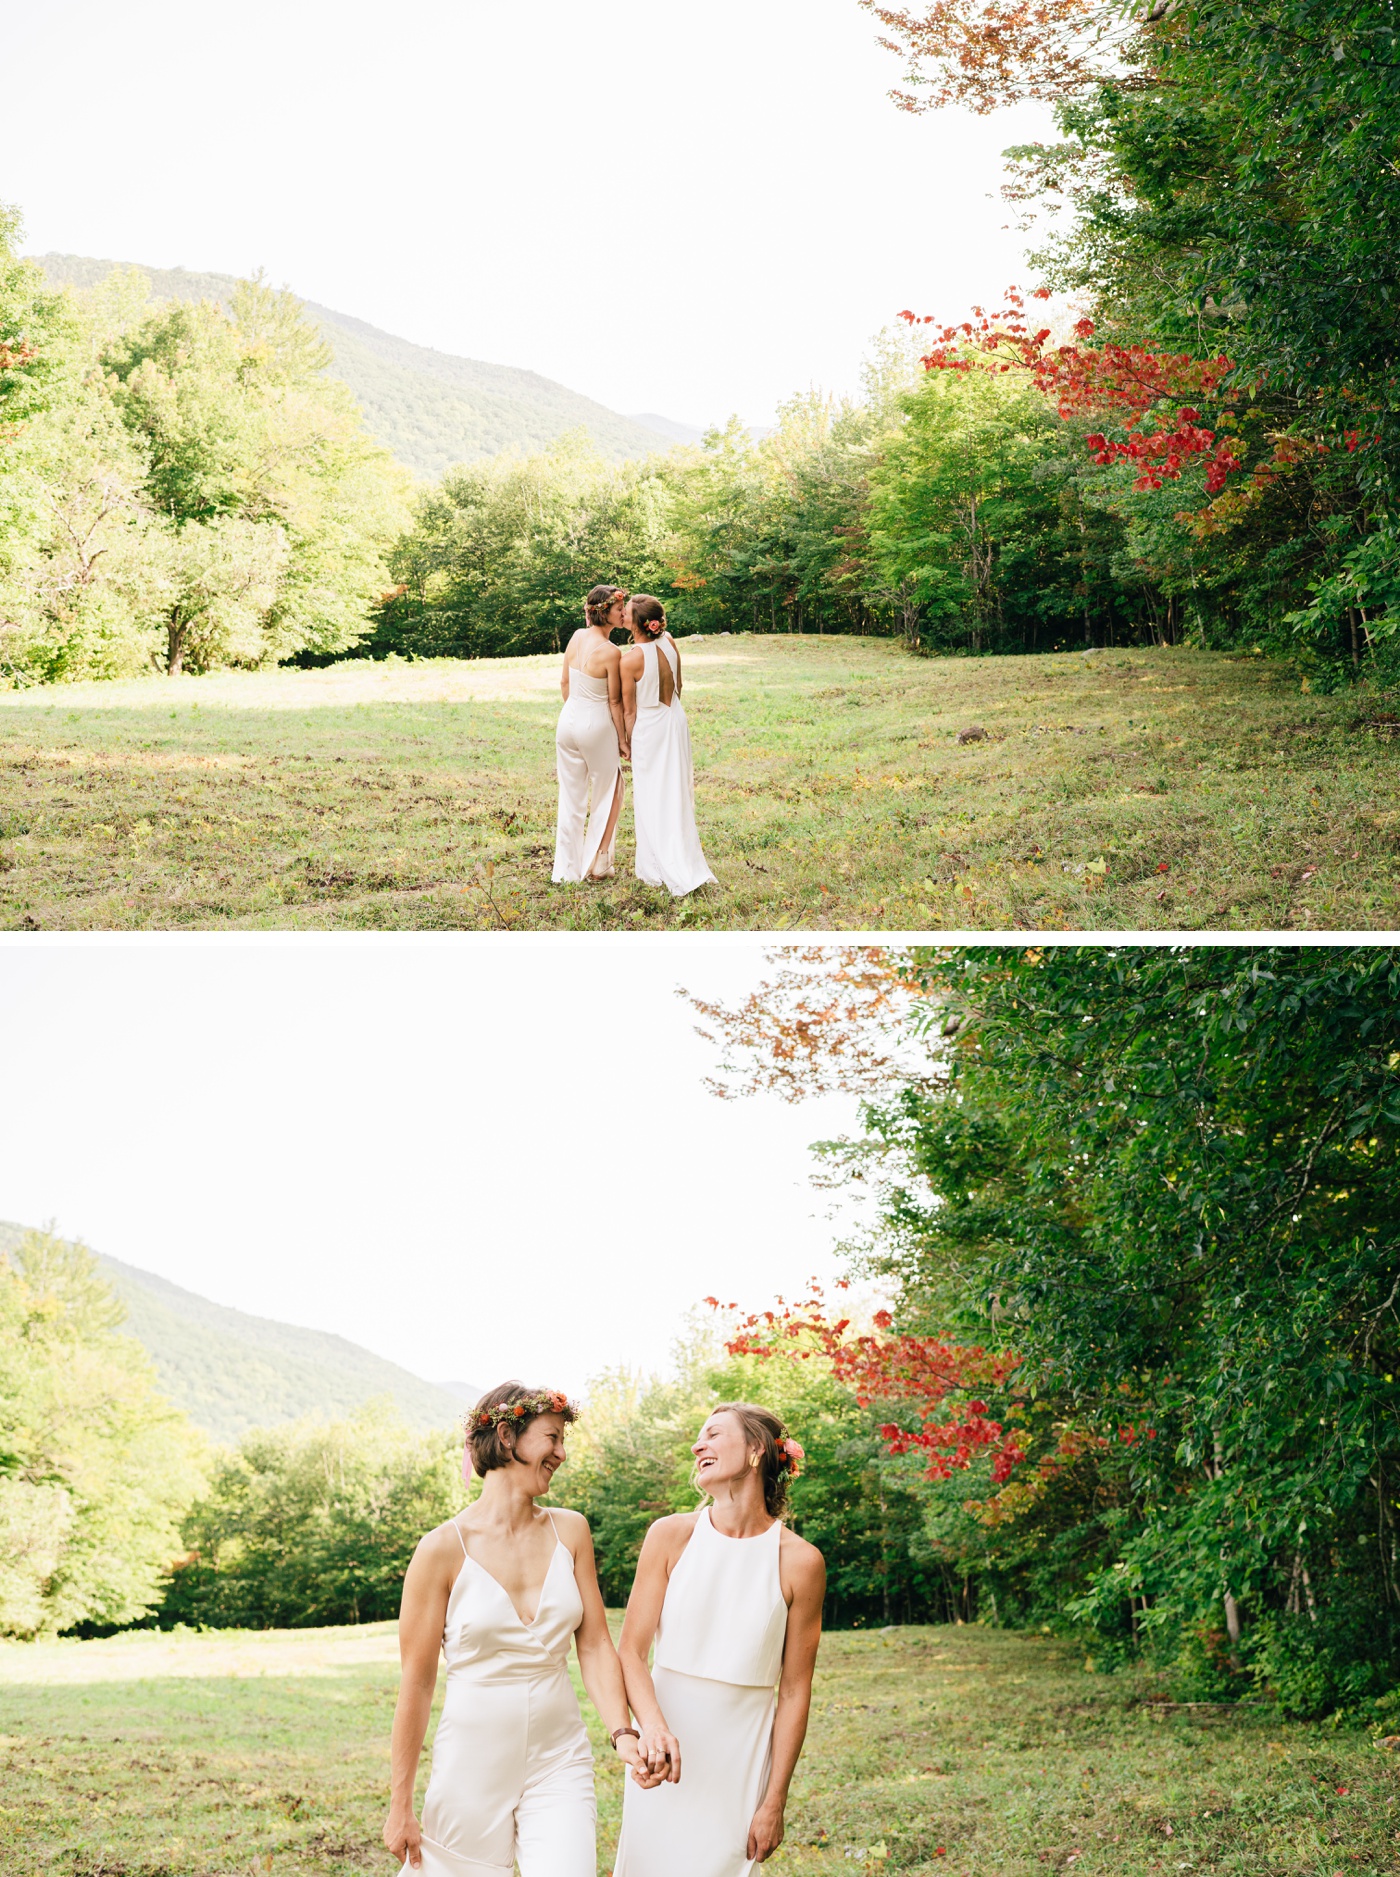 Bridal portraits on a private estate in the White Mountains